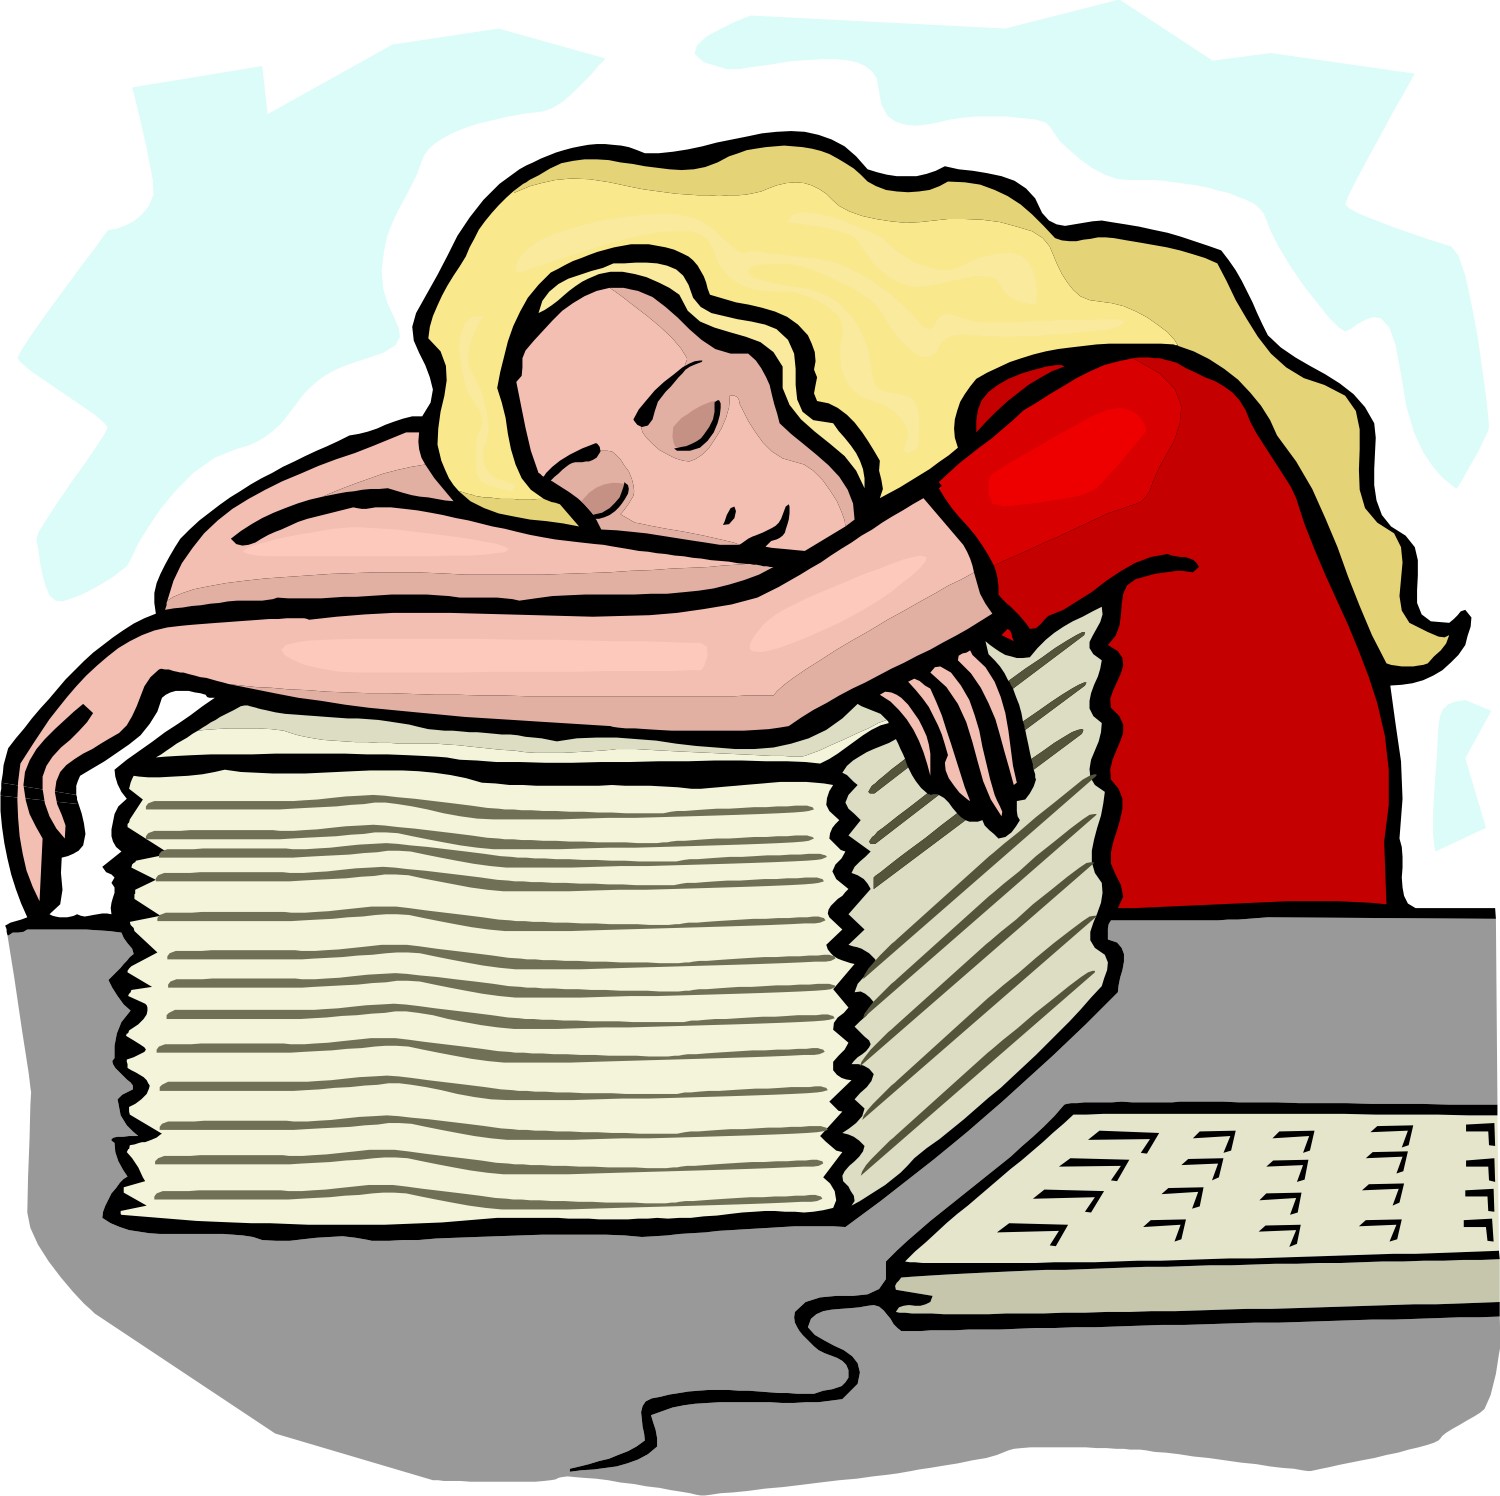 1080 Uhd Asleep At Desk Clipart Image Pack 6491 4570book